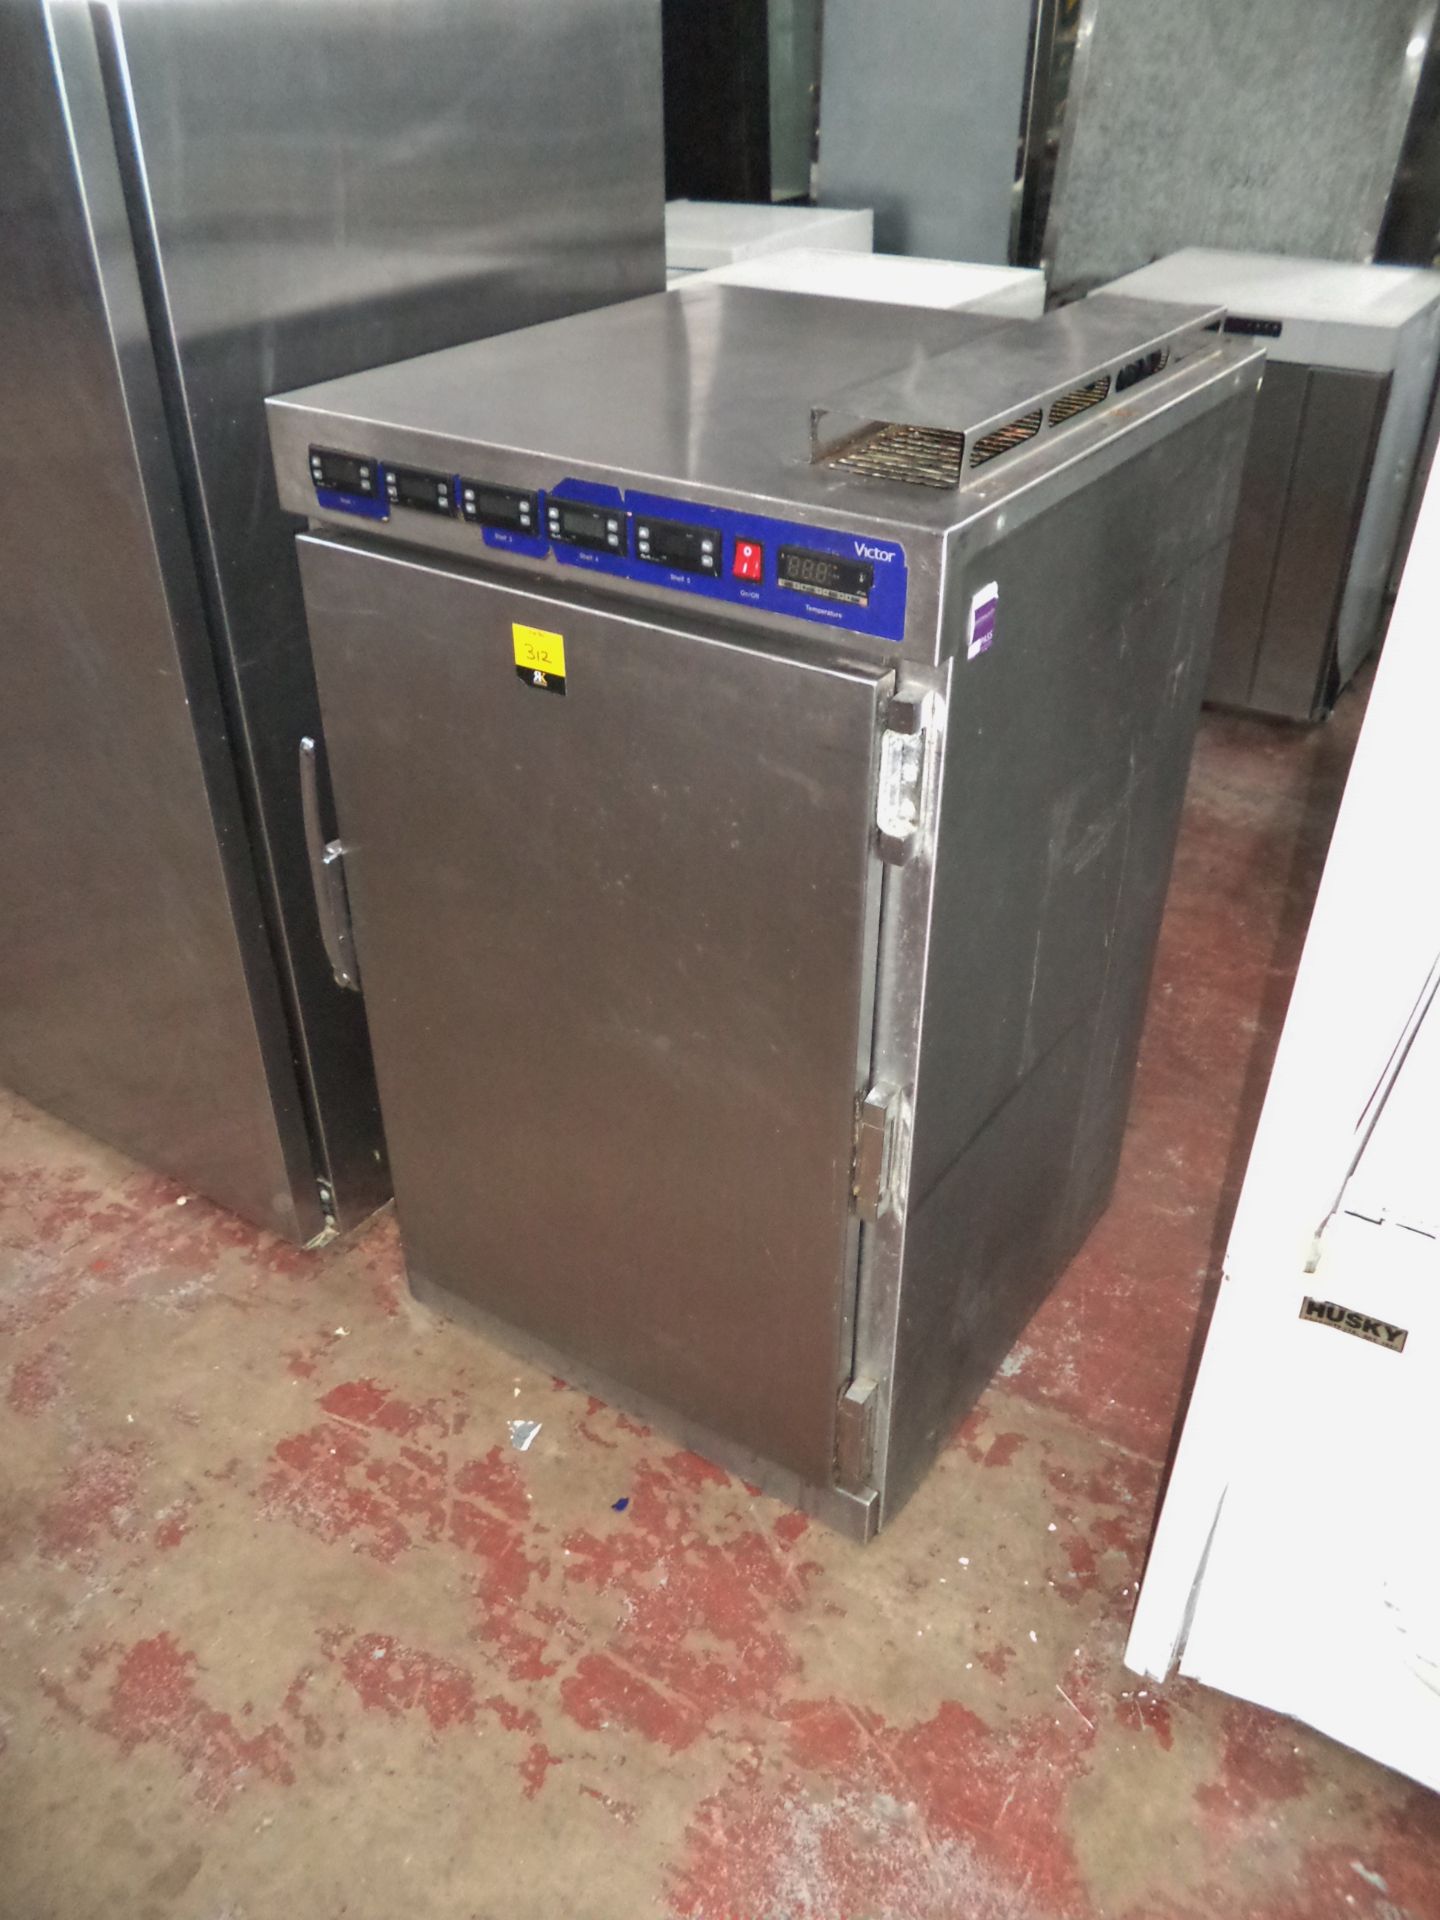 Victor stainless steel warming cupboard, model BL50H1SRST, with individual temperature controls